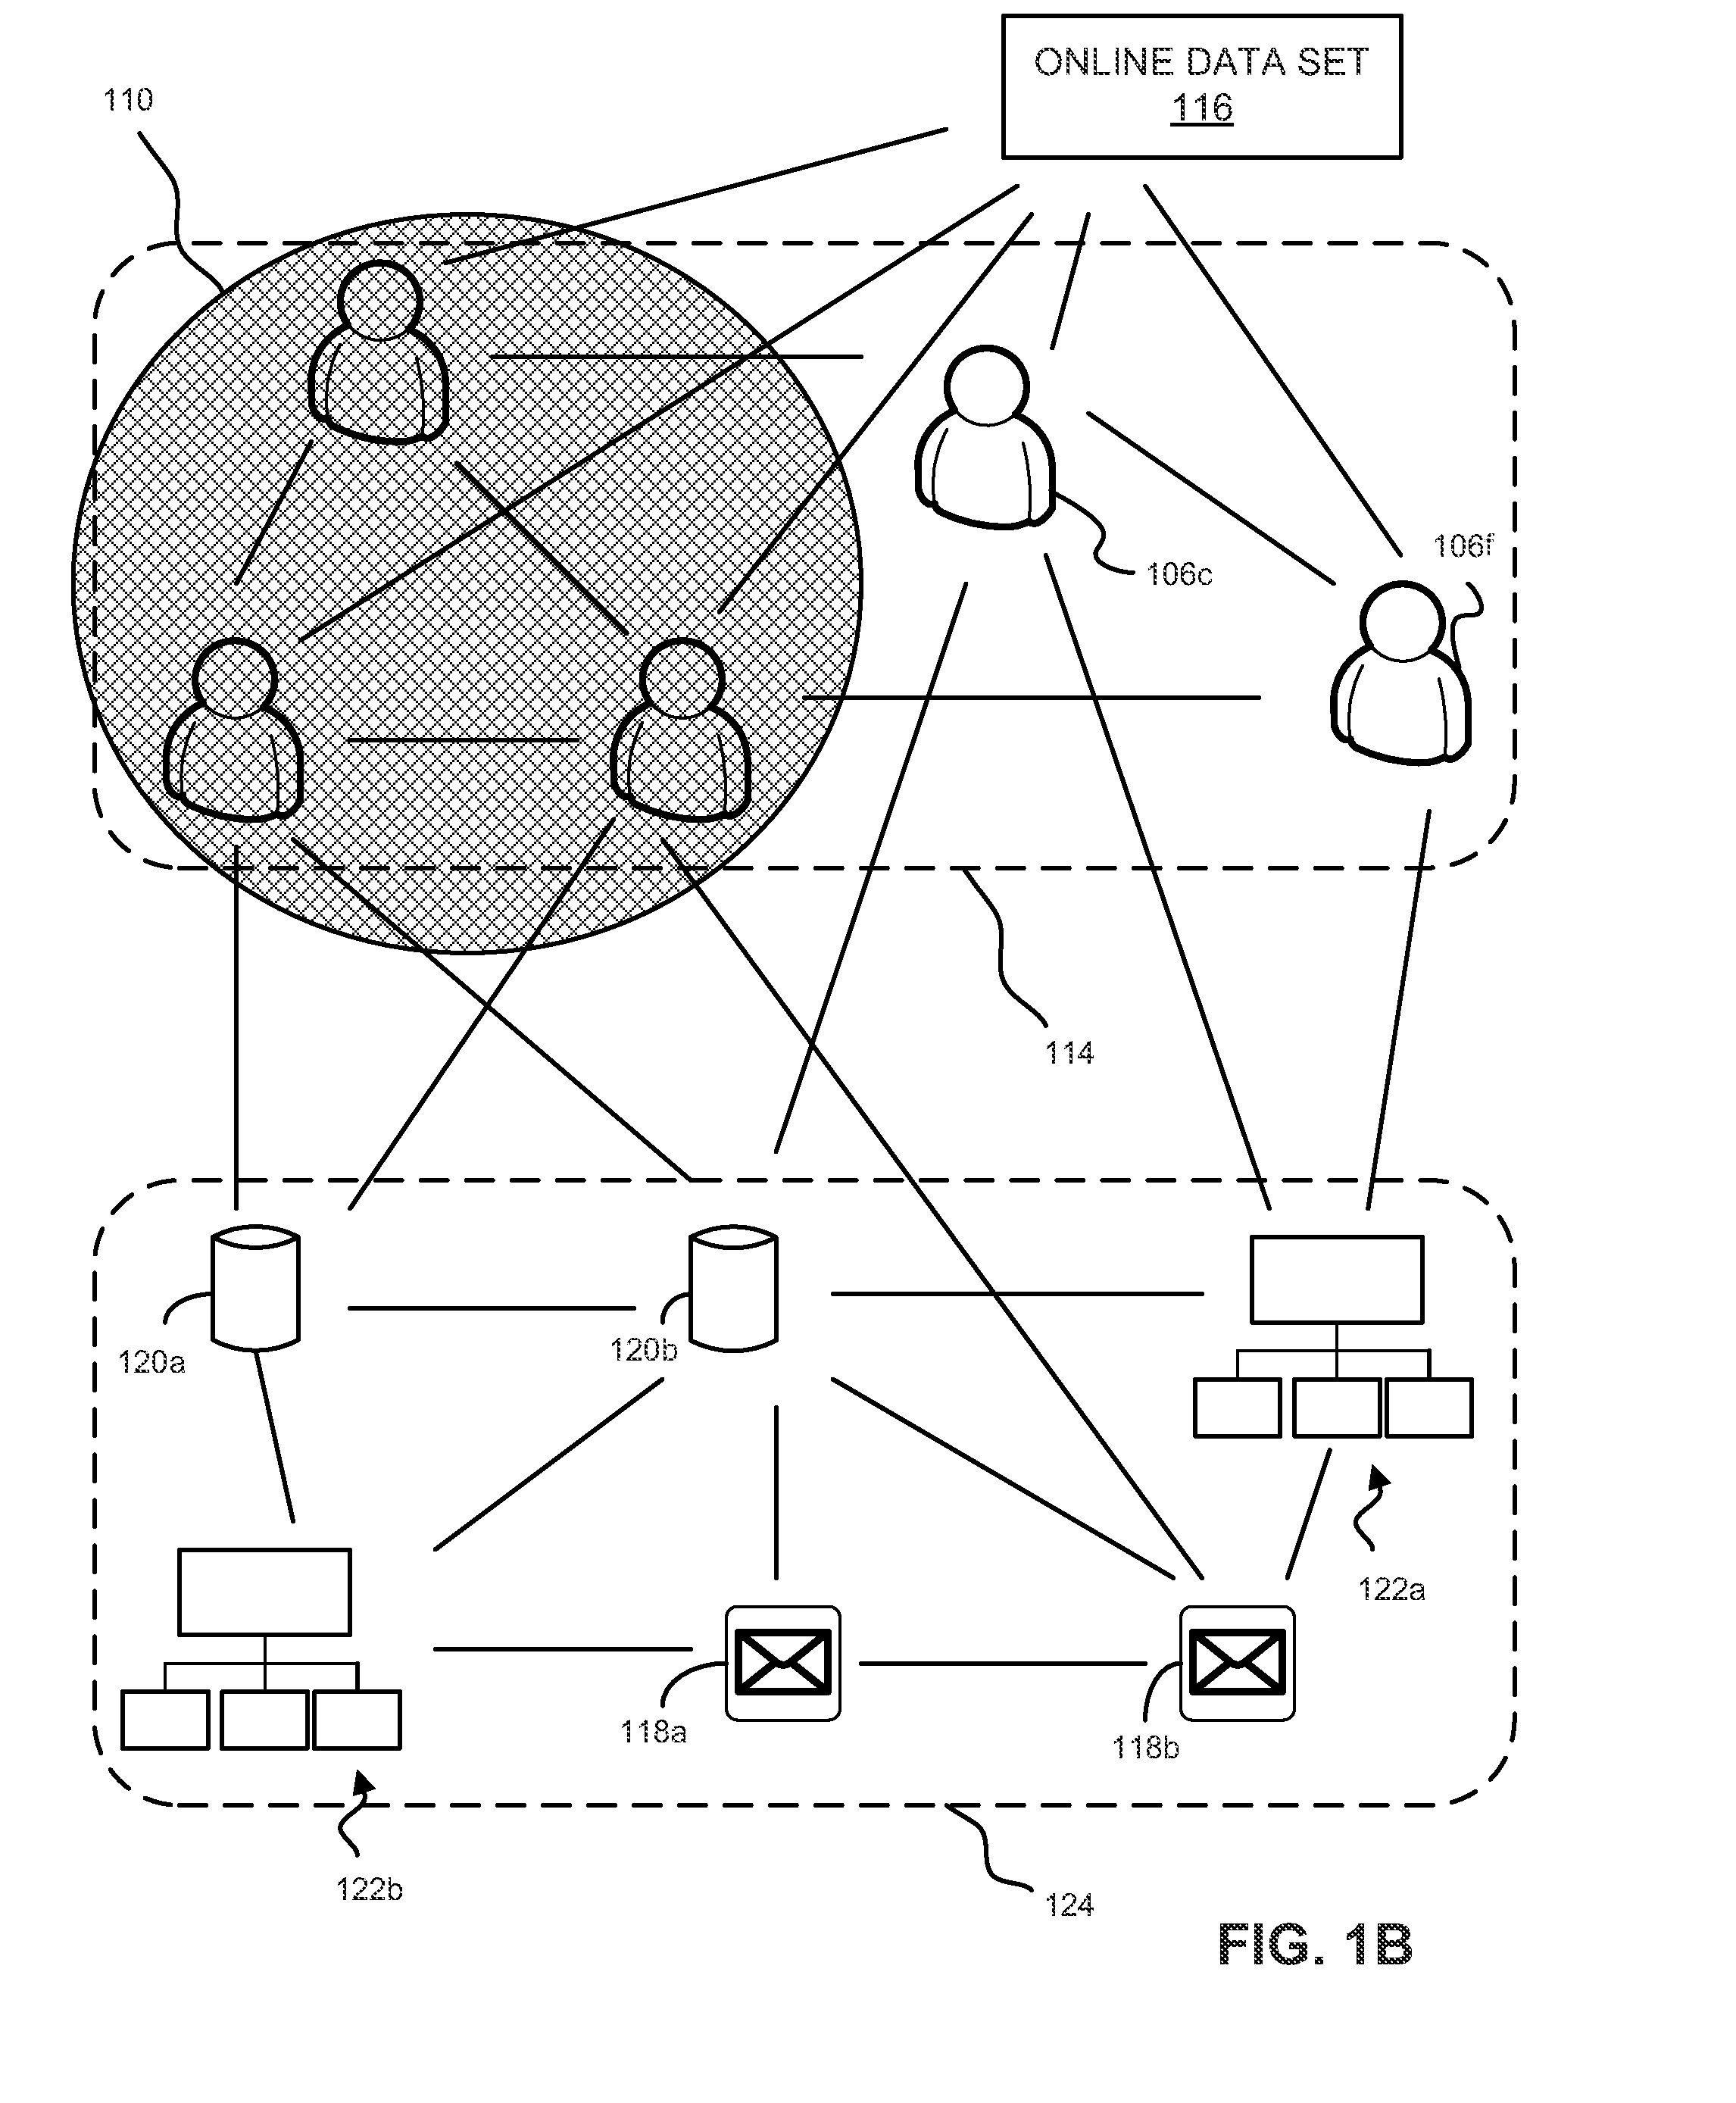 Method and system for thwarting insider attacks through informational network analysis